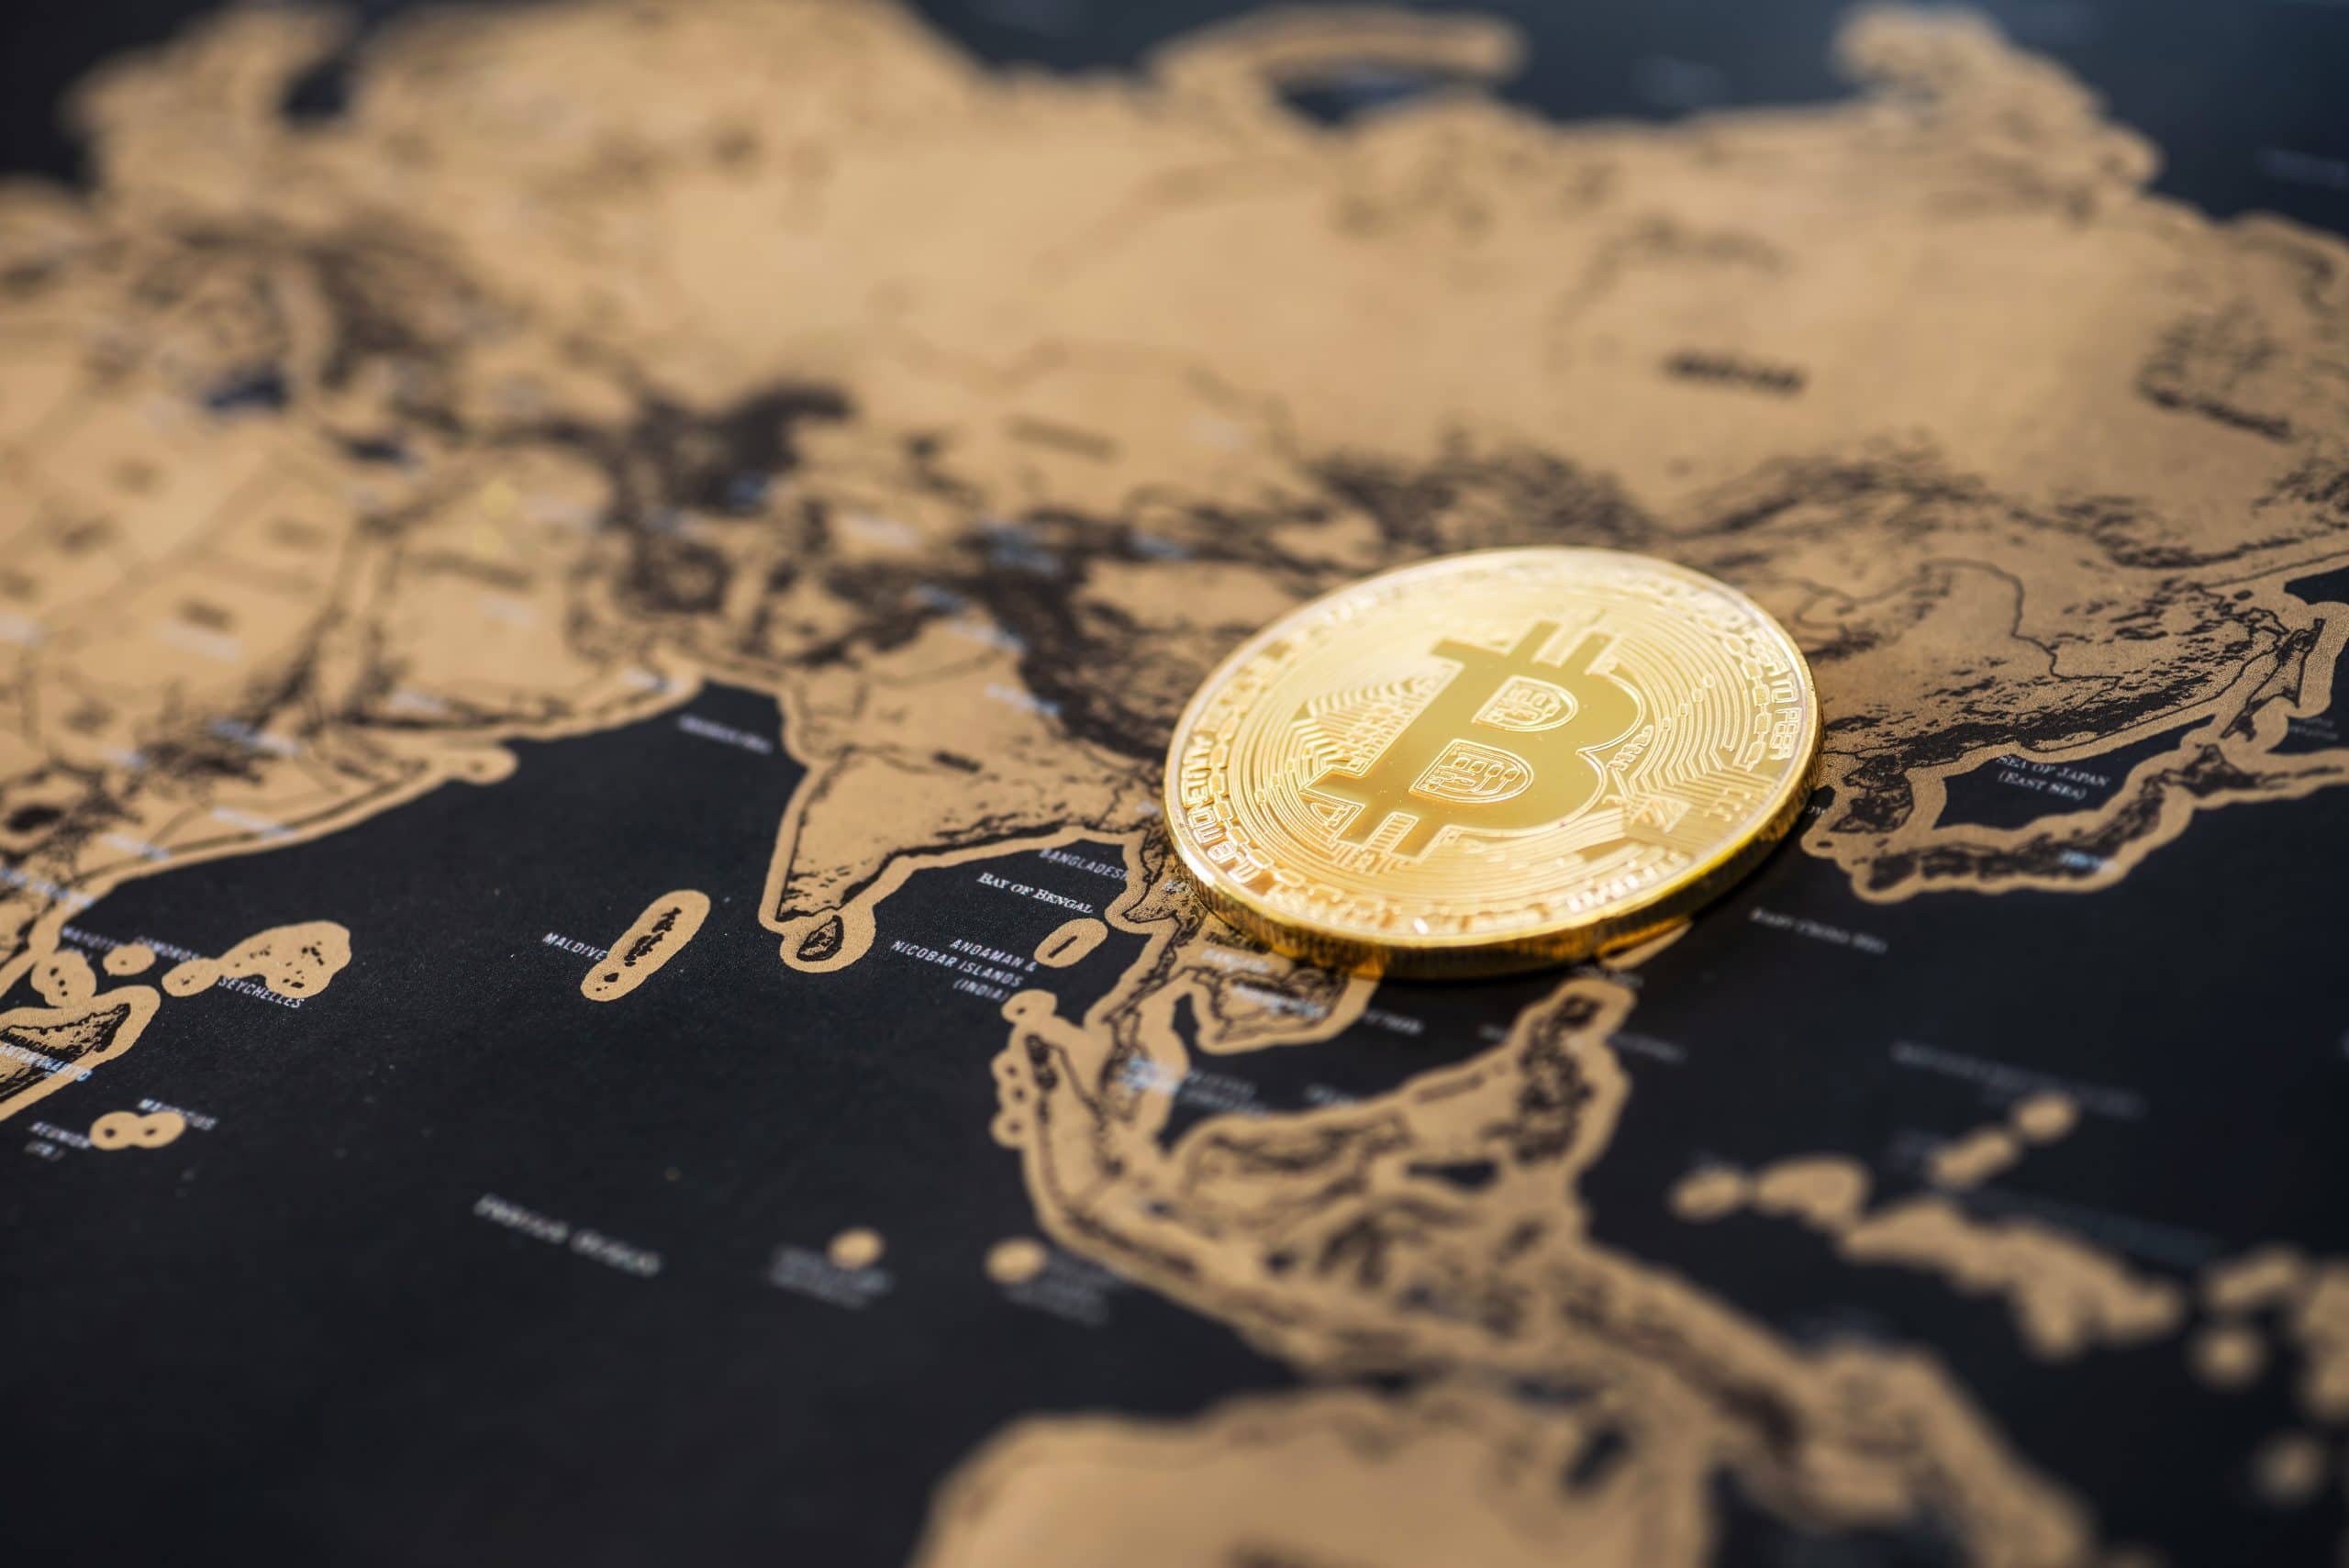 “Crypto adoption is highest in Asian countries” – Chainalysis